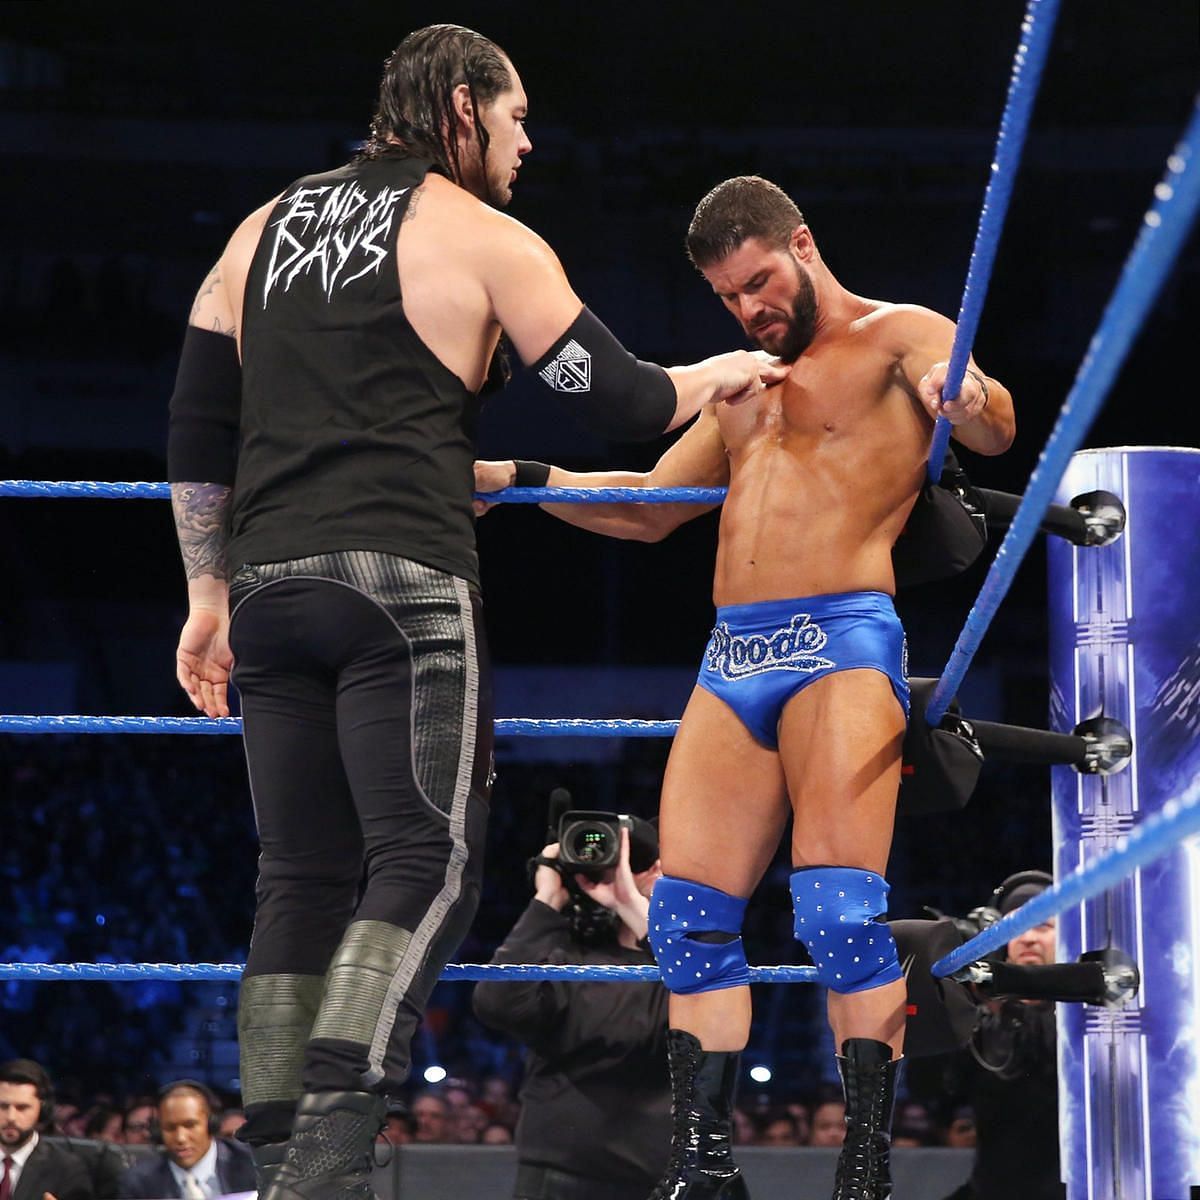 Robert Roode and Baron Corbin are no strangers to each other.